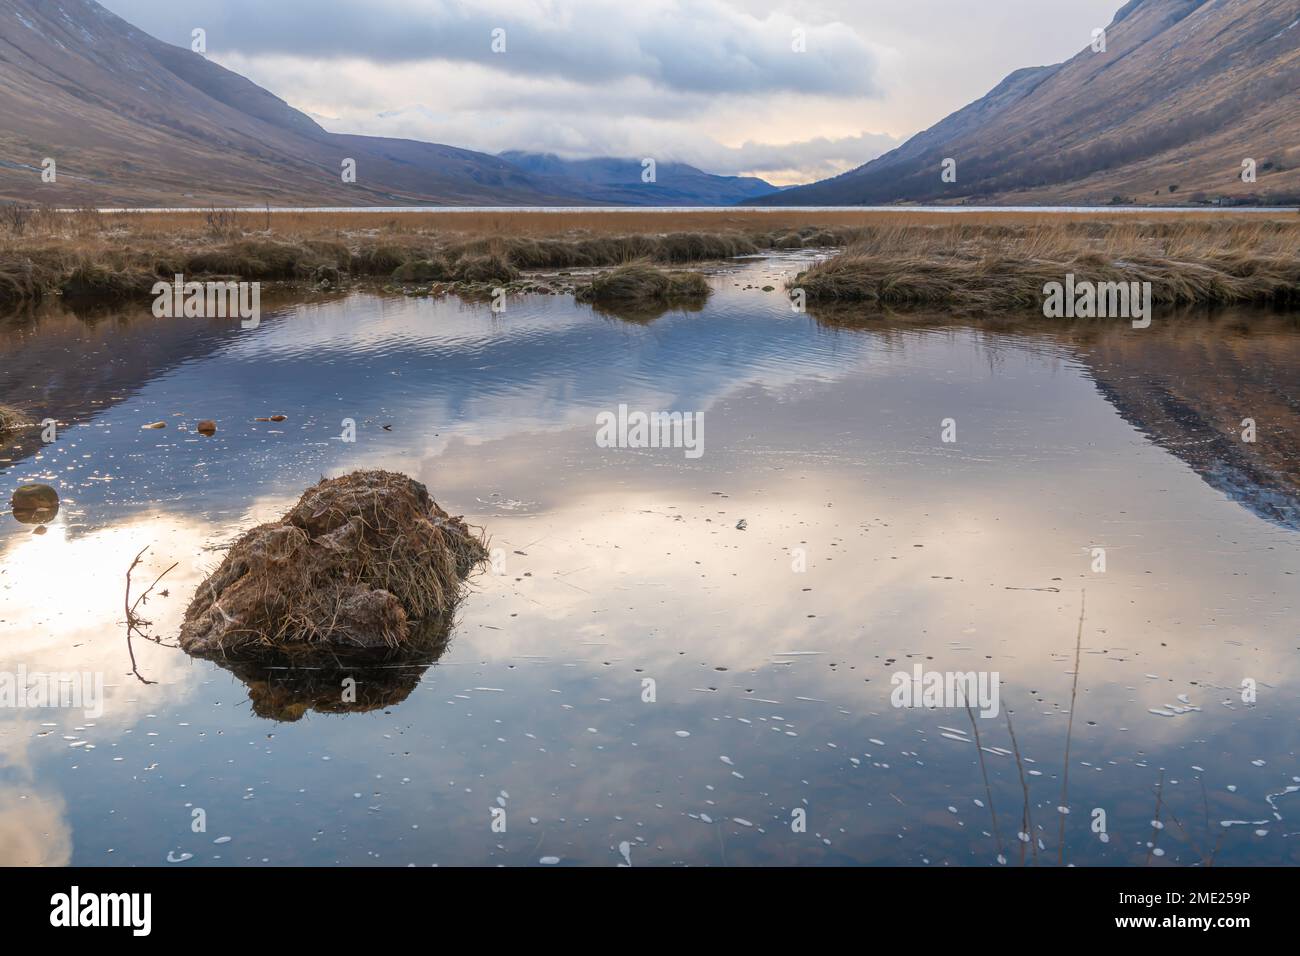 The meeting point of River Etive and the Loch Etive in the Highlands, Scotland Stock Photo